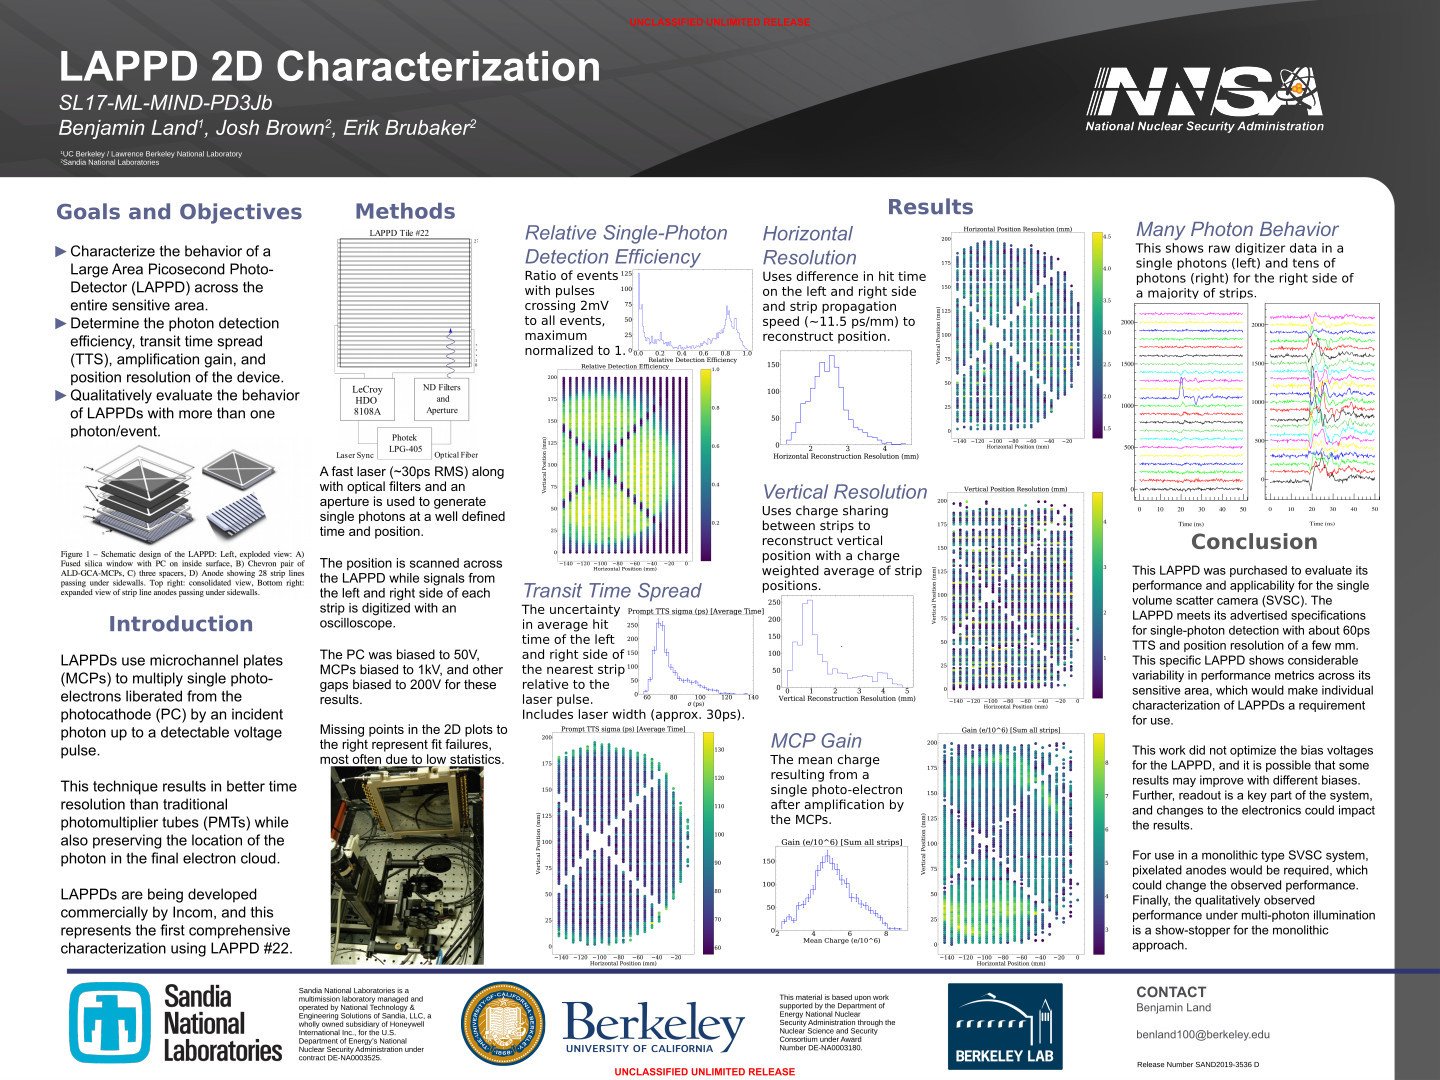 Physics posters from graduate school and beyond | ben.land